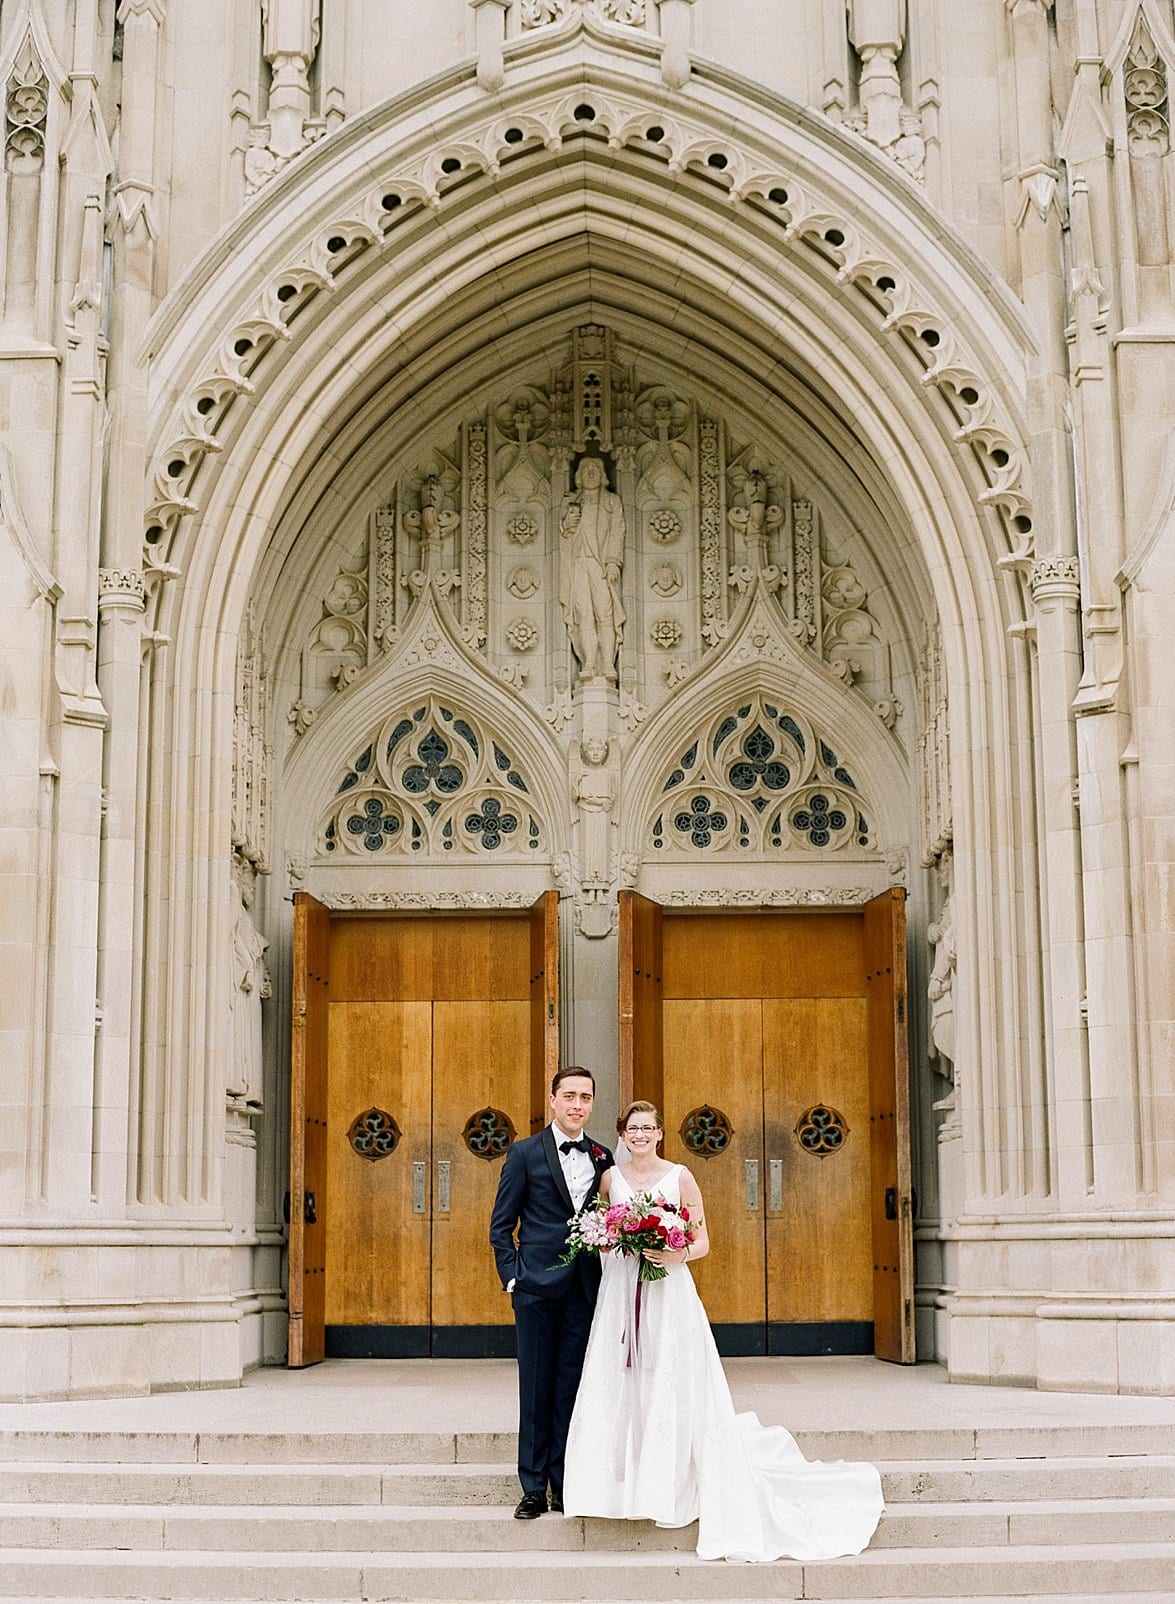 Duke Chapel bride and groom standing on the front steps of the church photo